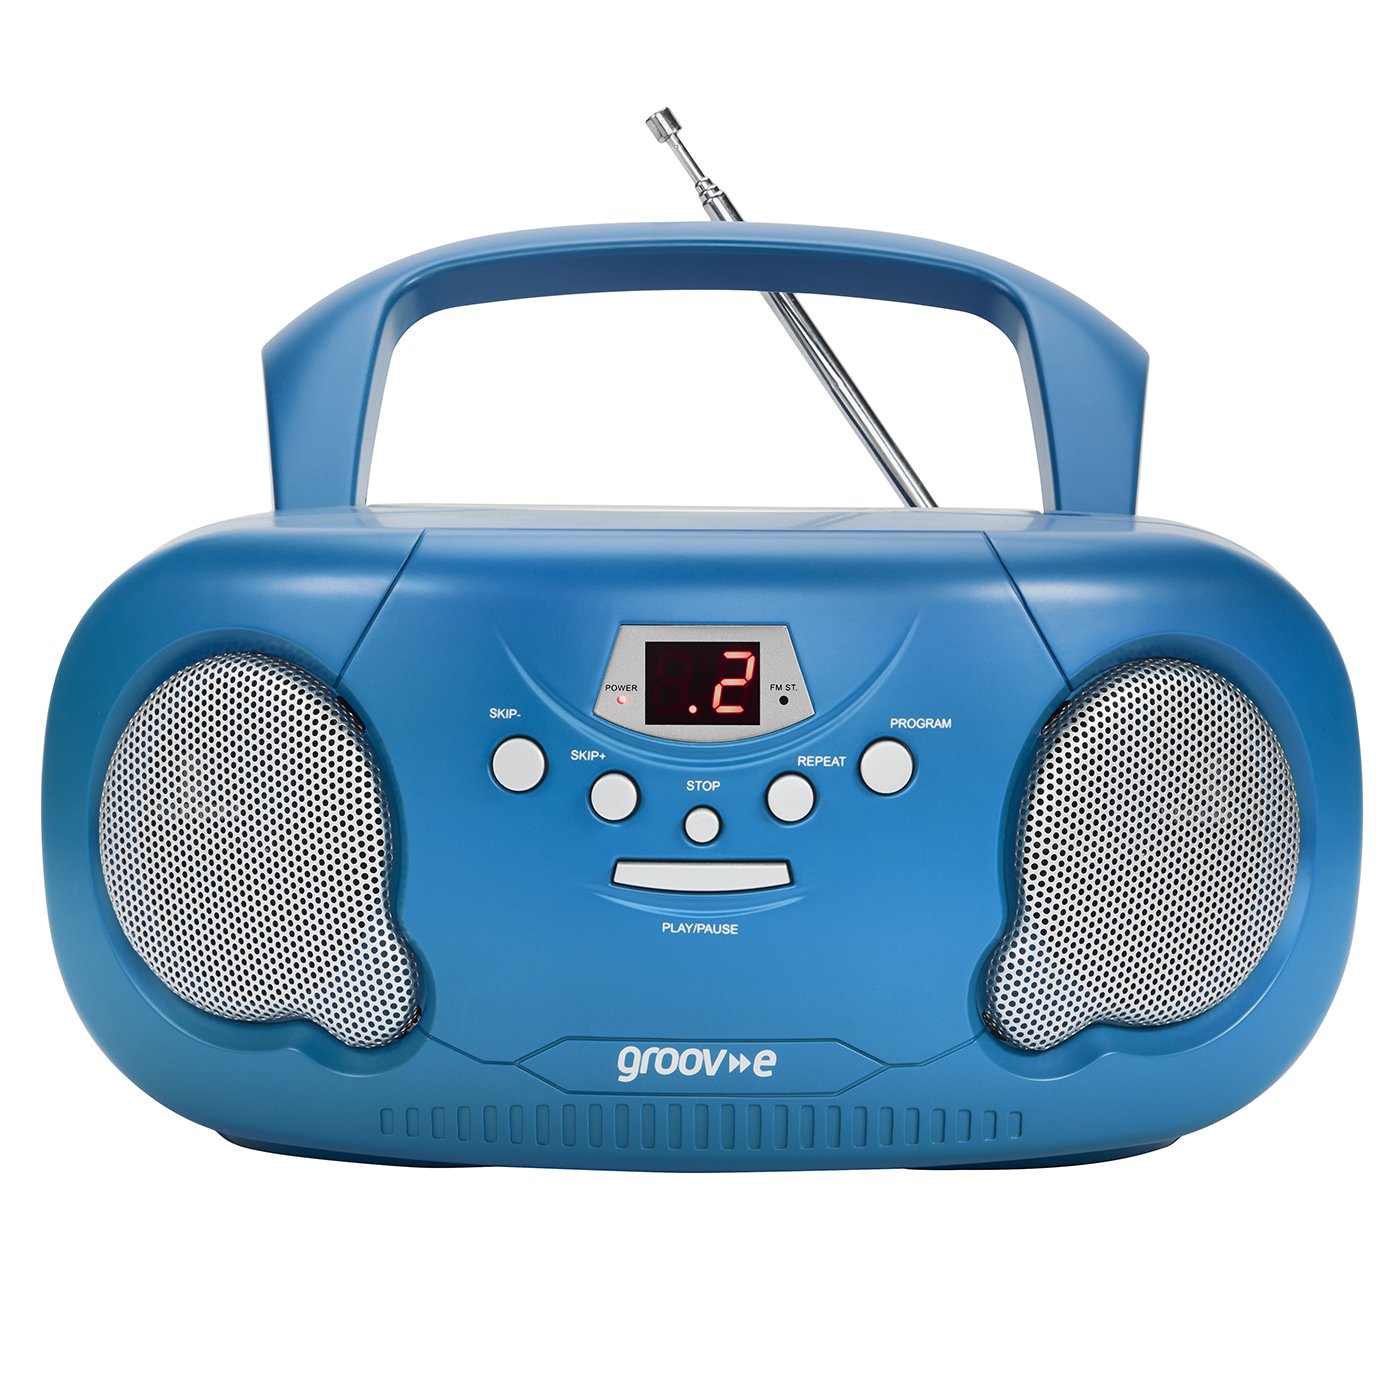 Groov-e GVPS733/BE Portable CD Player Boombox with AM/FM Radio, 3.5mm AUX Input, Headphone Jack, LED Display - Blue, 21.0 cm*23.0 cm*10.0 cm